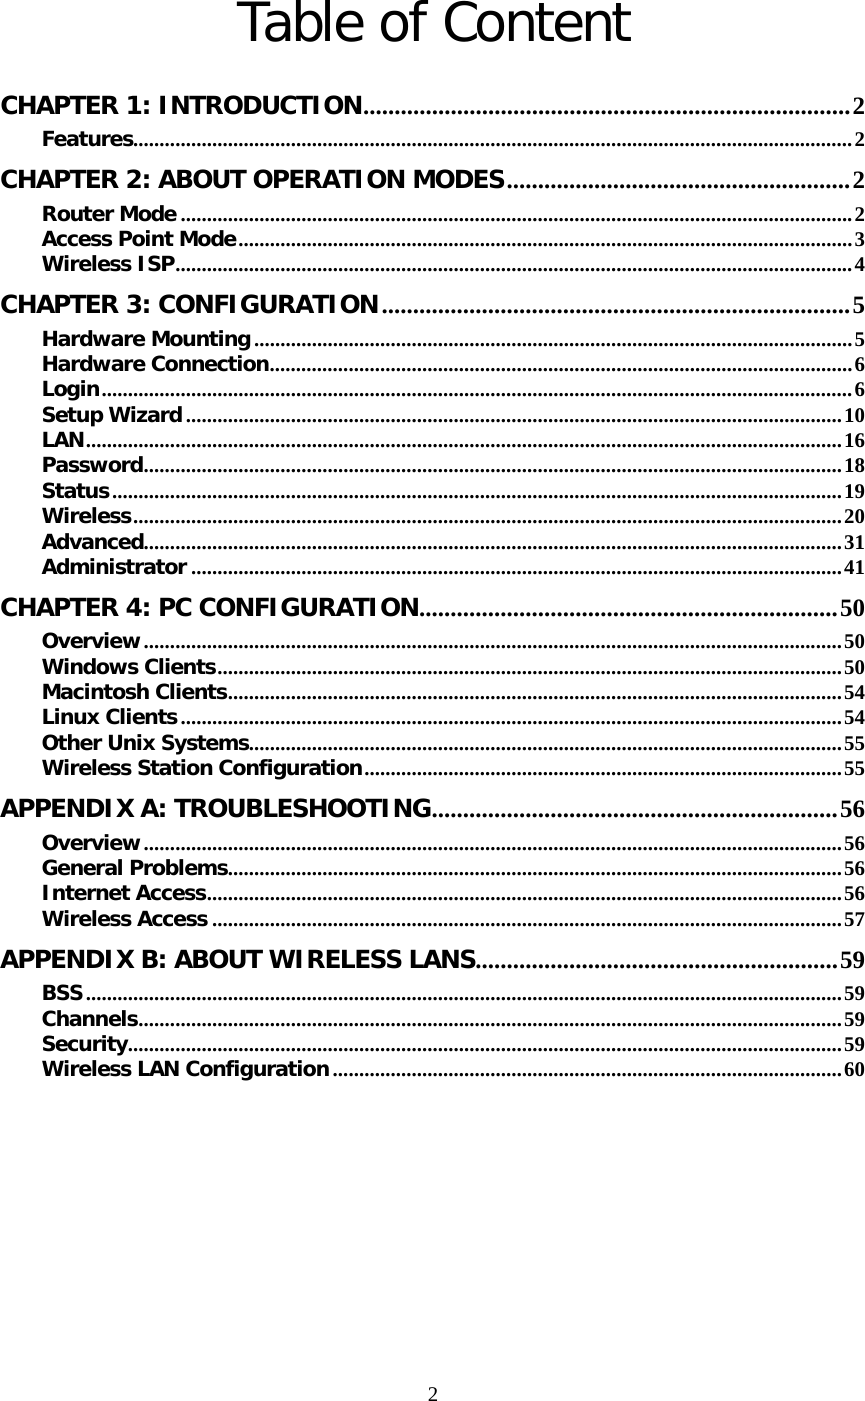   2Table of Content  CHAPTER 1: INTRODUCTION..............................................................................2 Features.........................................................................................................................................2 CHAPTER 2: ABOUT OPERATION MODES.......................................................2 Router Mode ................................................................................................................................2 Access Point Mode.....................................................................................................................3 Wireless ISP.................................................................................................................................4 CHAPTER 3: CONFIGURATION...........................................................................5 Hardware Mounting..................................................................................................................5 Hardware Connection...............................................................................................................6 Login...............................................................................................................................................6 Setup Wizard.............................................................................................................................10 LAN................................................................................................................................................16 Password.....................................................................................................................................18 Status...........................................................................................................................................19 Wireless.......................................................................................................................................20 Advanced.....................................................................................................................................31 Administrator ............................................................................................................................41 CHAPTER 4: PC CONFIGURATION...................................................................50 Overview.....................................................................................................................................50 Windows Clients.......................................................................................................................50 Macintosh Clients.....................................................................................................................54 Linux Clients..............................................................................................................................54 Other Unix Systems.................................................................................................................55 Wireless Station Configuration...........................................................................................55 APPENDIX A: TROUBLESHOOTING.................................................................56 Overview.....................................................................................................................................56 General Problems.....................................................................................................................56 Internet Access.........................................................................................................................56 Wireless Access ........................................................................................................................57 APPENDIX B: ABOUT WIRELESS LANS..........................................................59 BSS................................................................................................................................................59 Channels......................................................................................................................................59 Security........................................................................................................................................59 Wireless LAN Configuration.................................................................................................60 